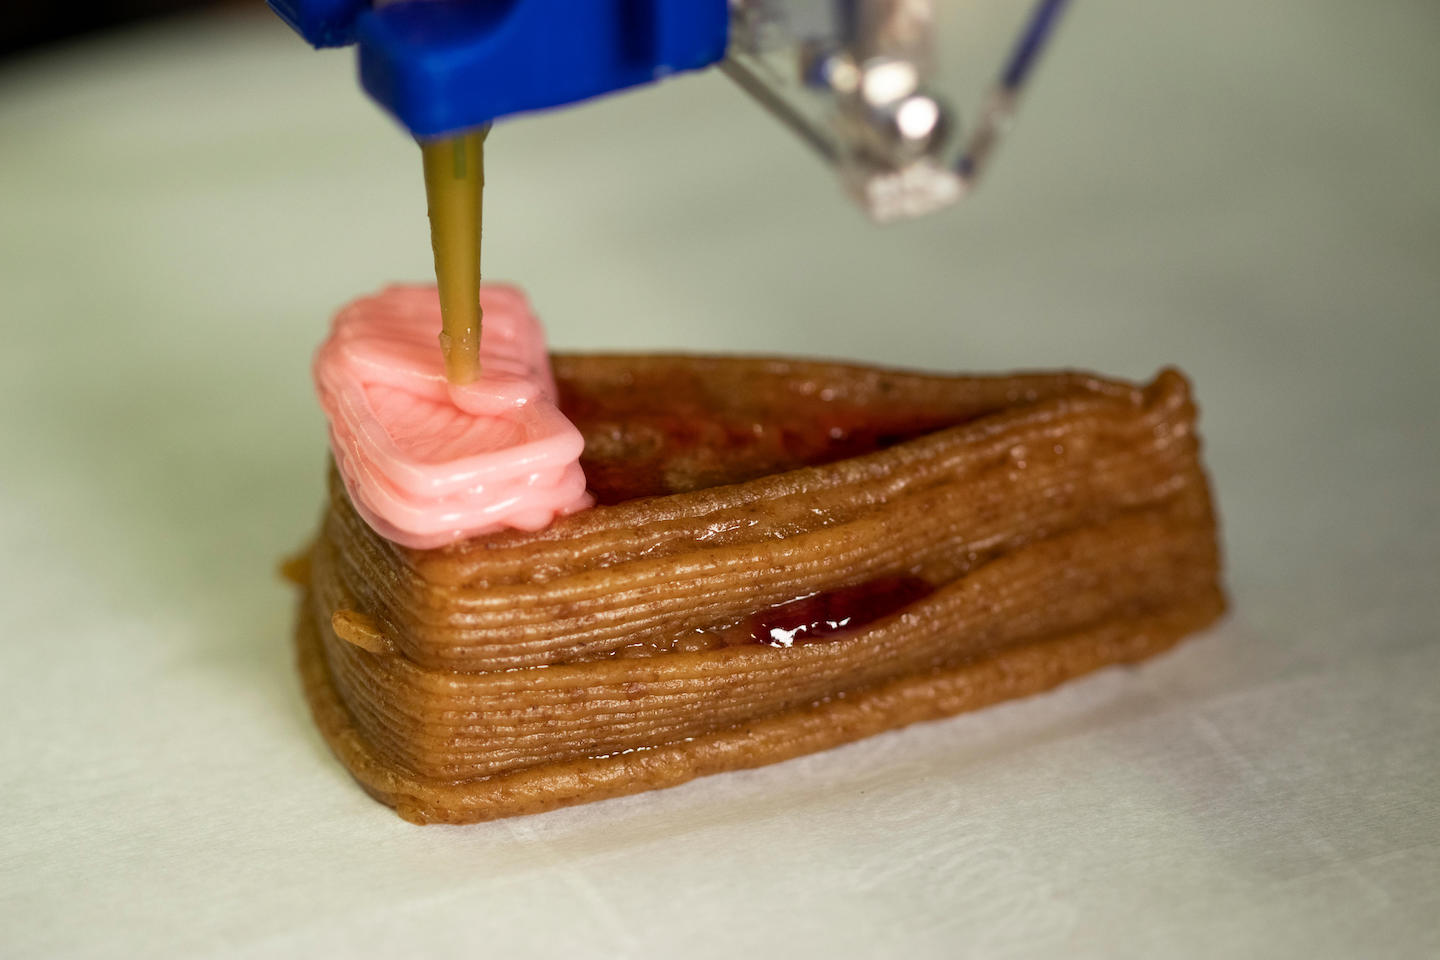 a cake-shaped wedge of 3-D printed brown batter is being topped with pink frosting by a 3-D printing nozzle